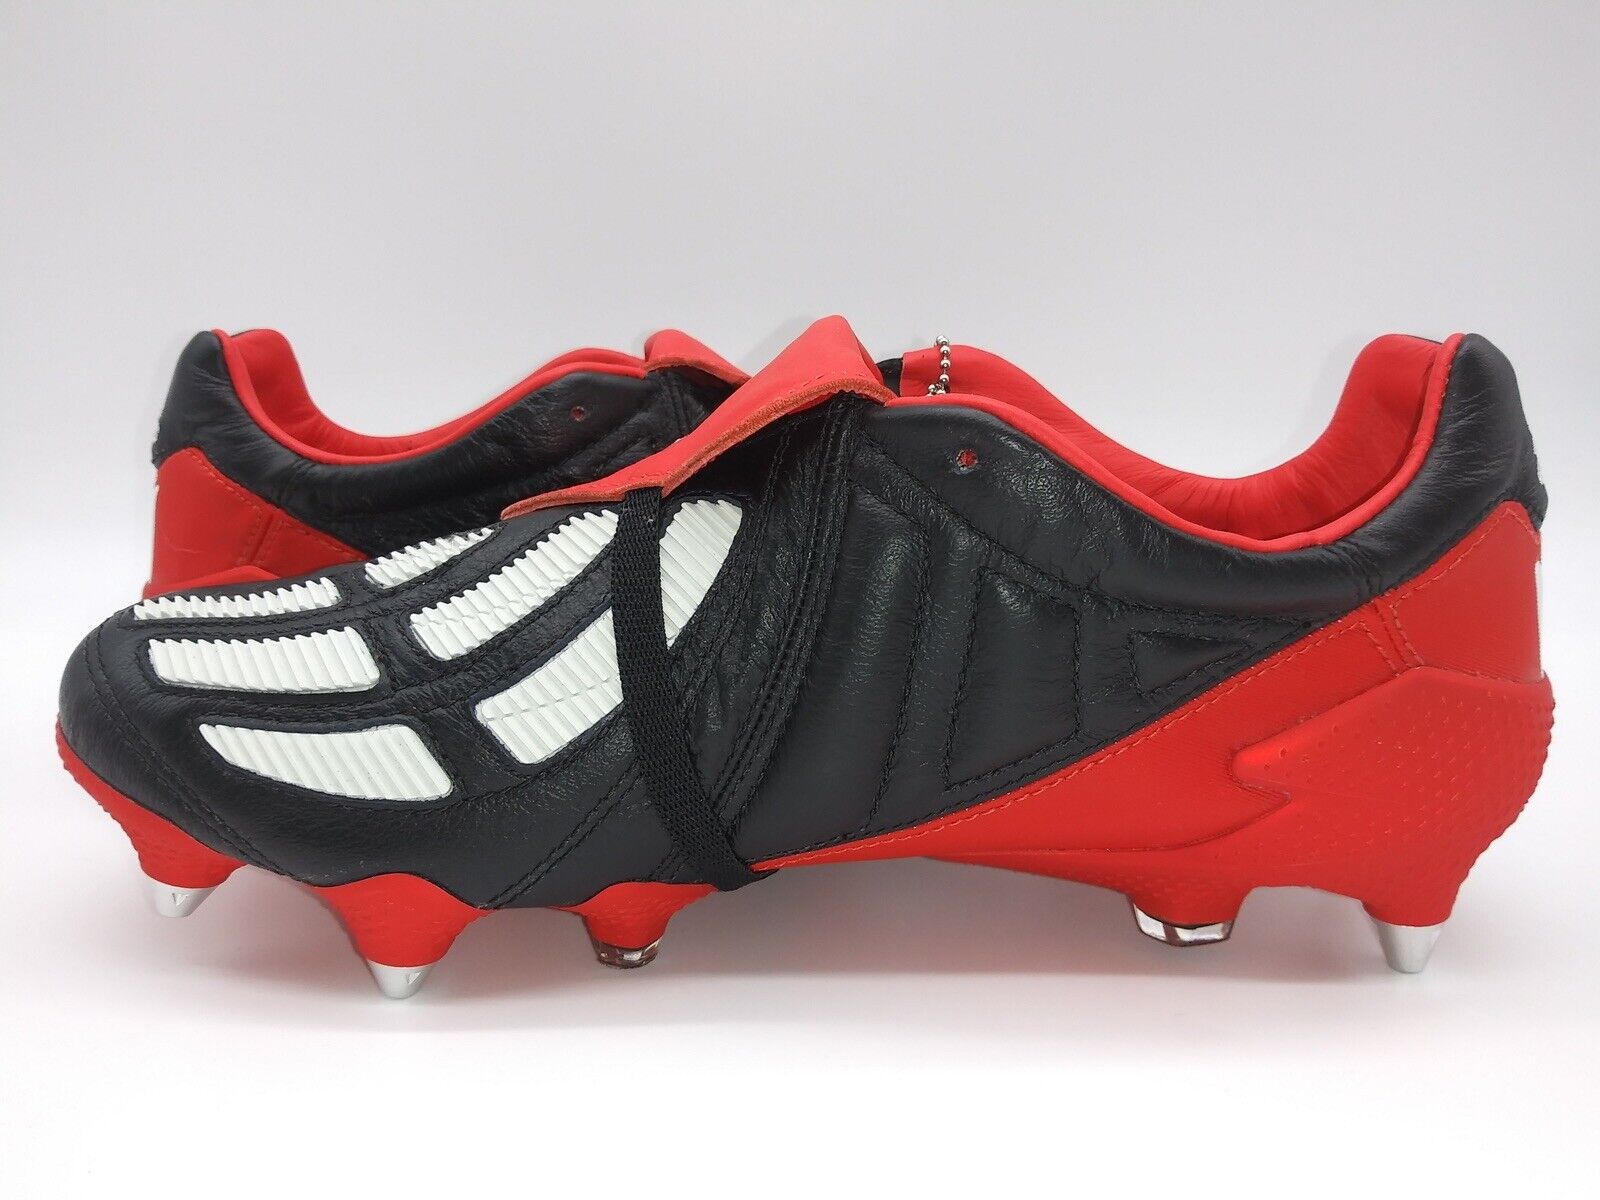 Adidas Predator Mania SG Black Red Limited Edition (Only 2002 Pairs  Worldwide)